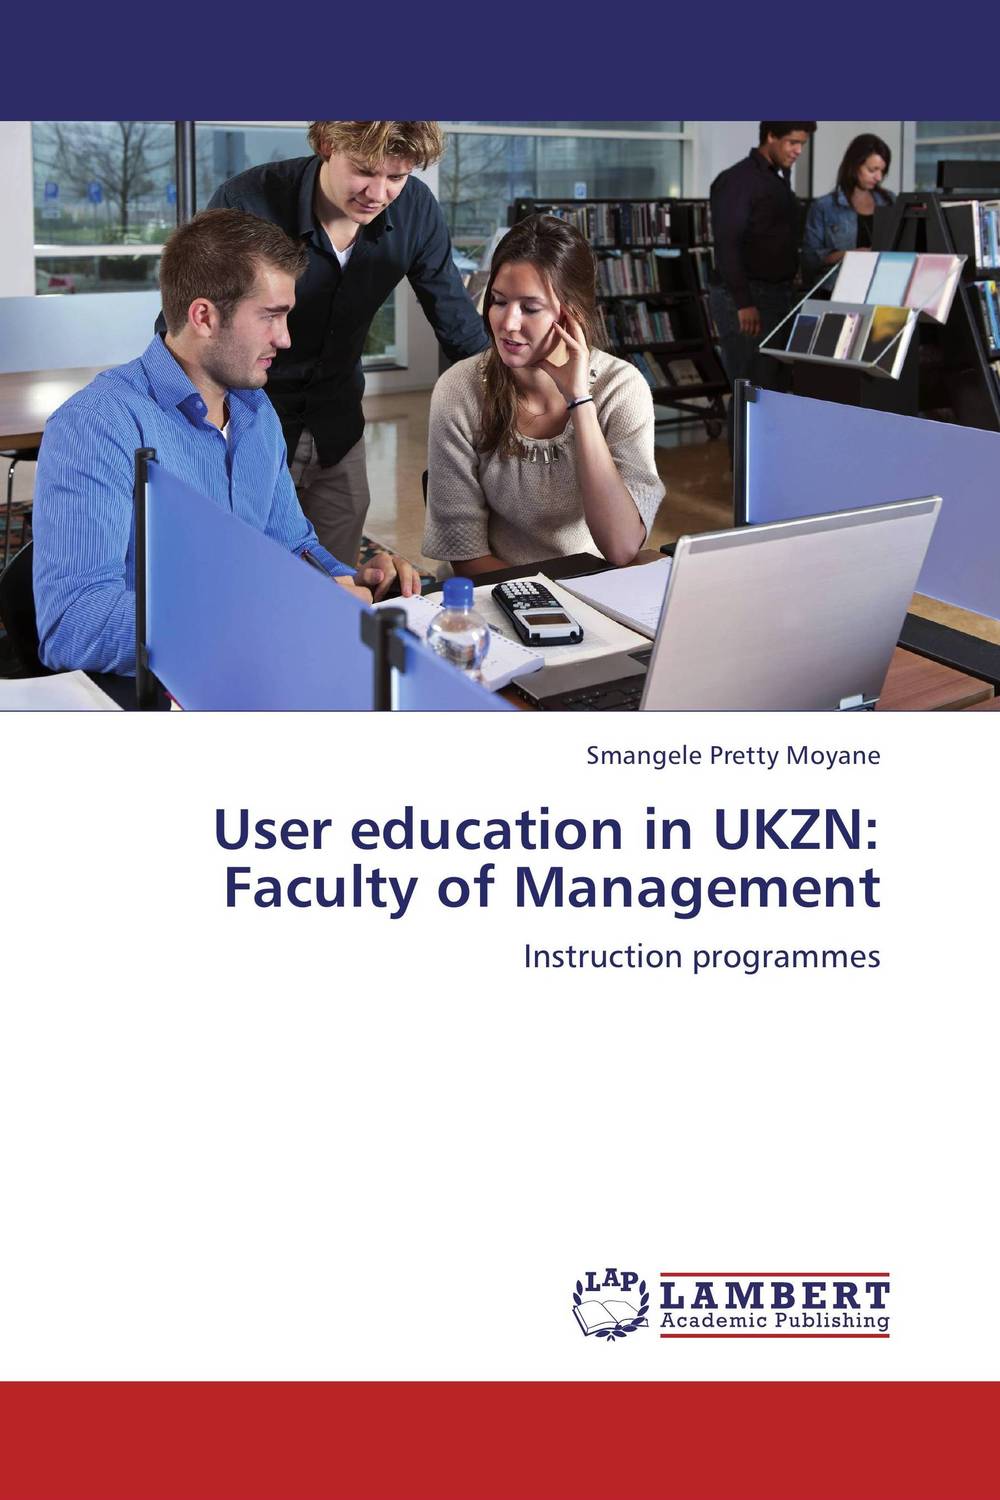 User education in UKZN: Faculty of Management